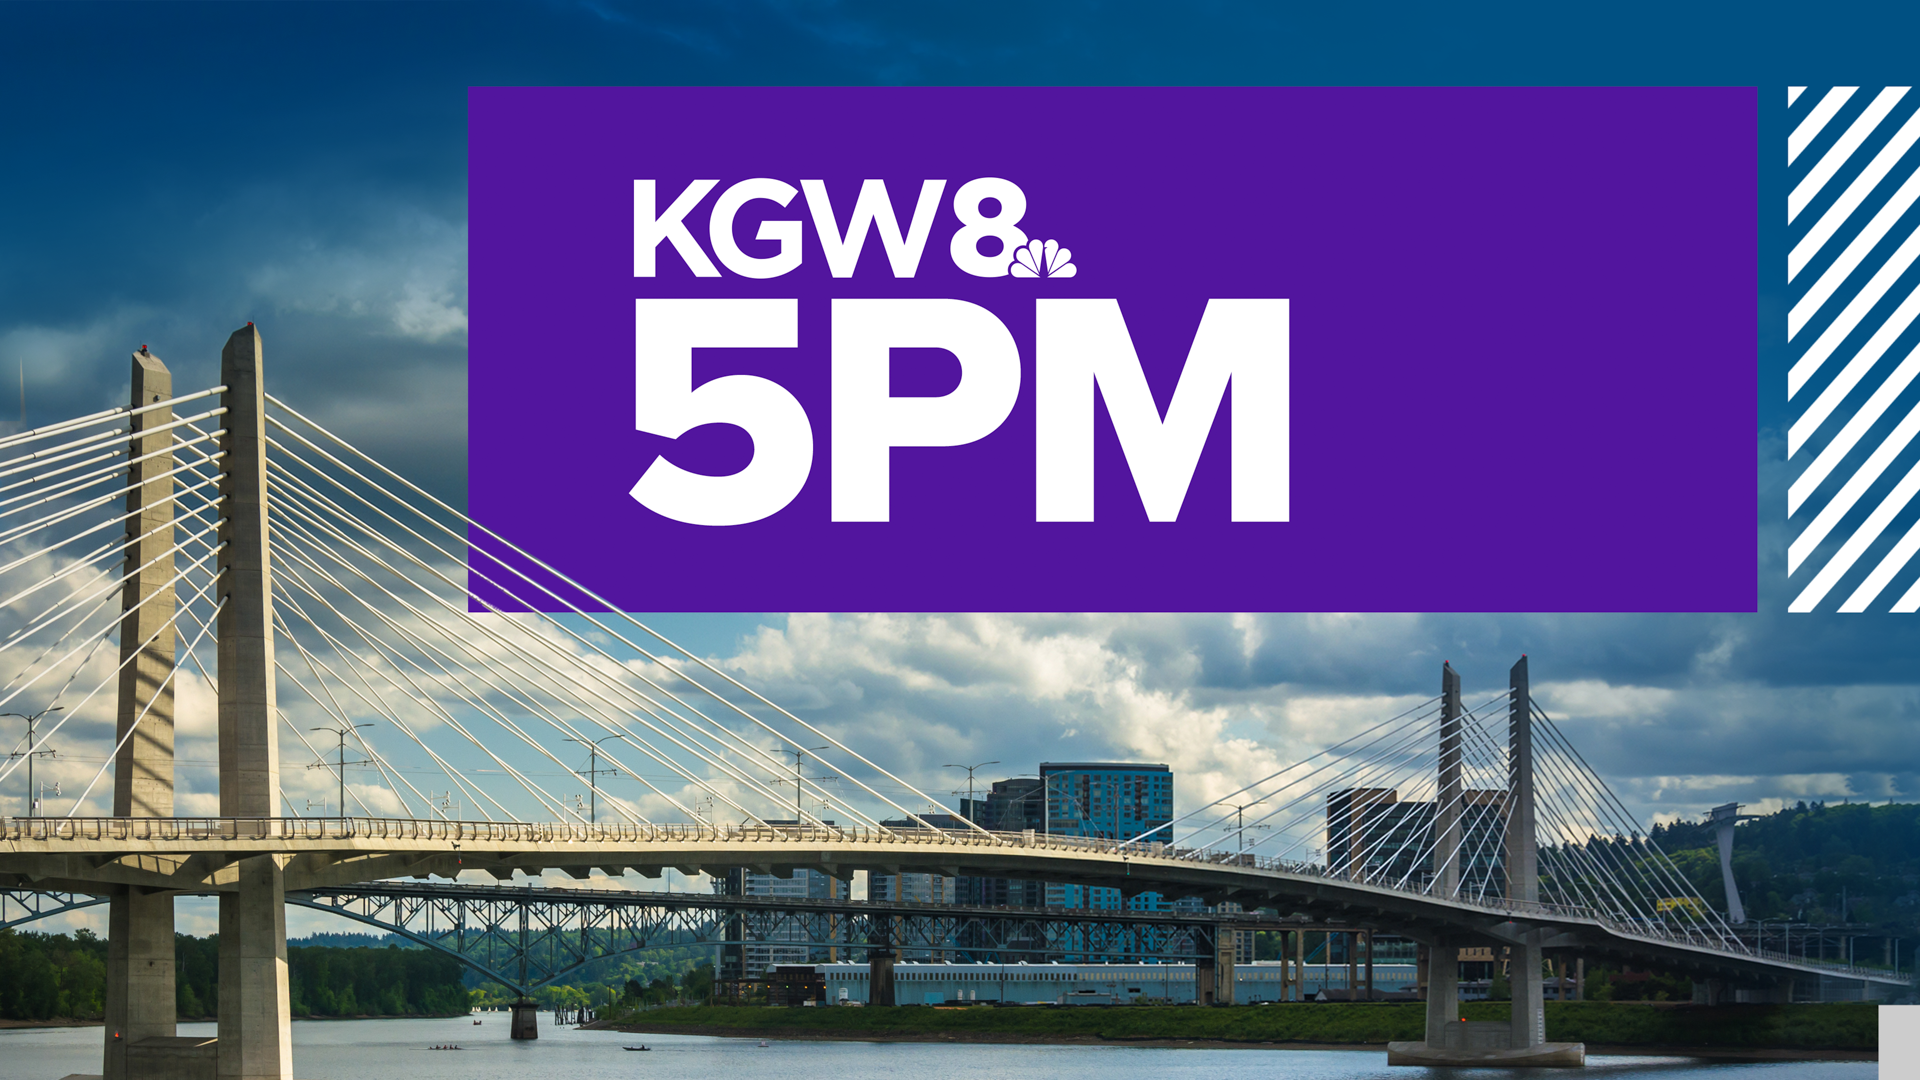 KGW Top Stories: 5 p.m., Monday February 6, 2023